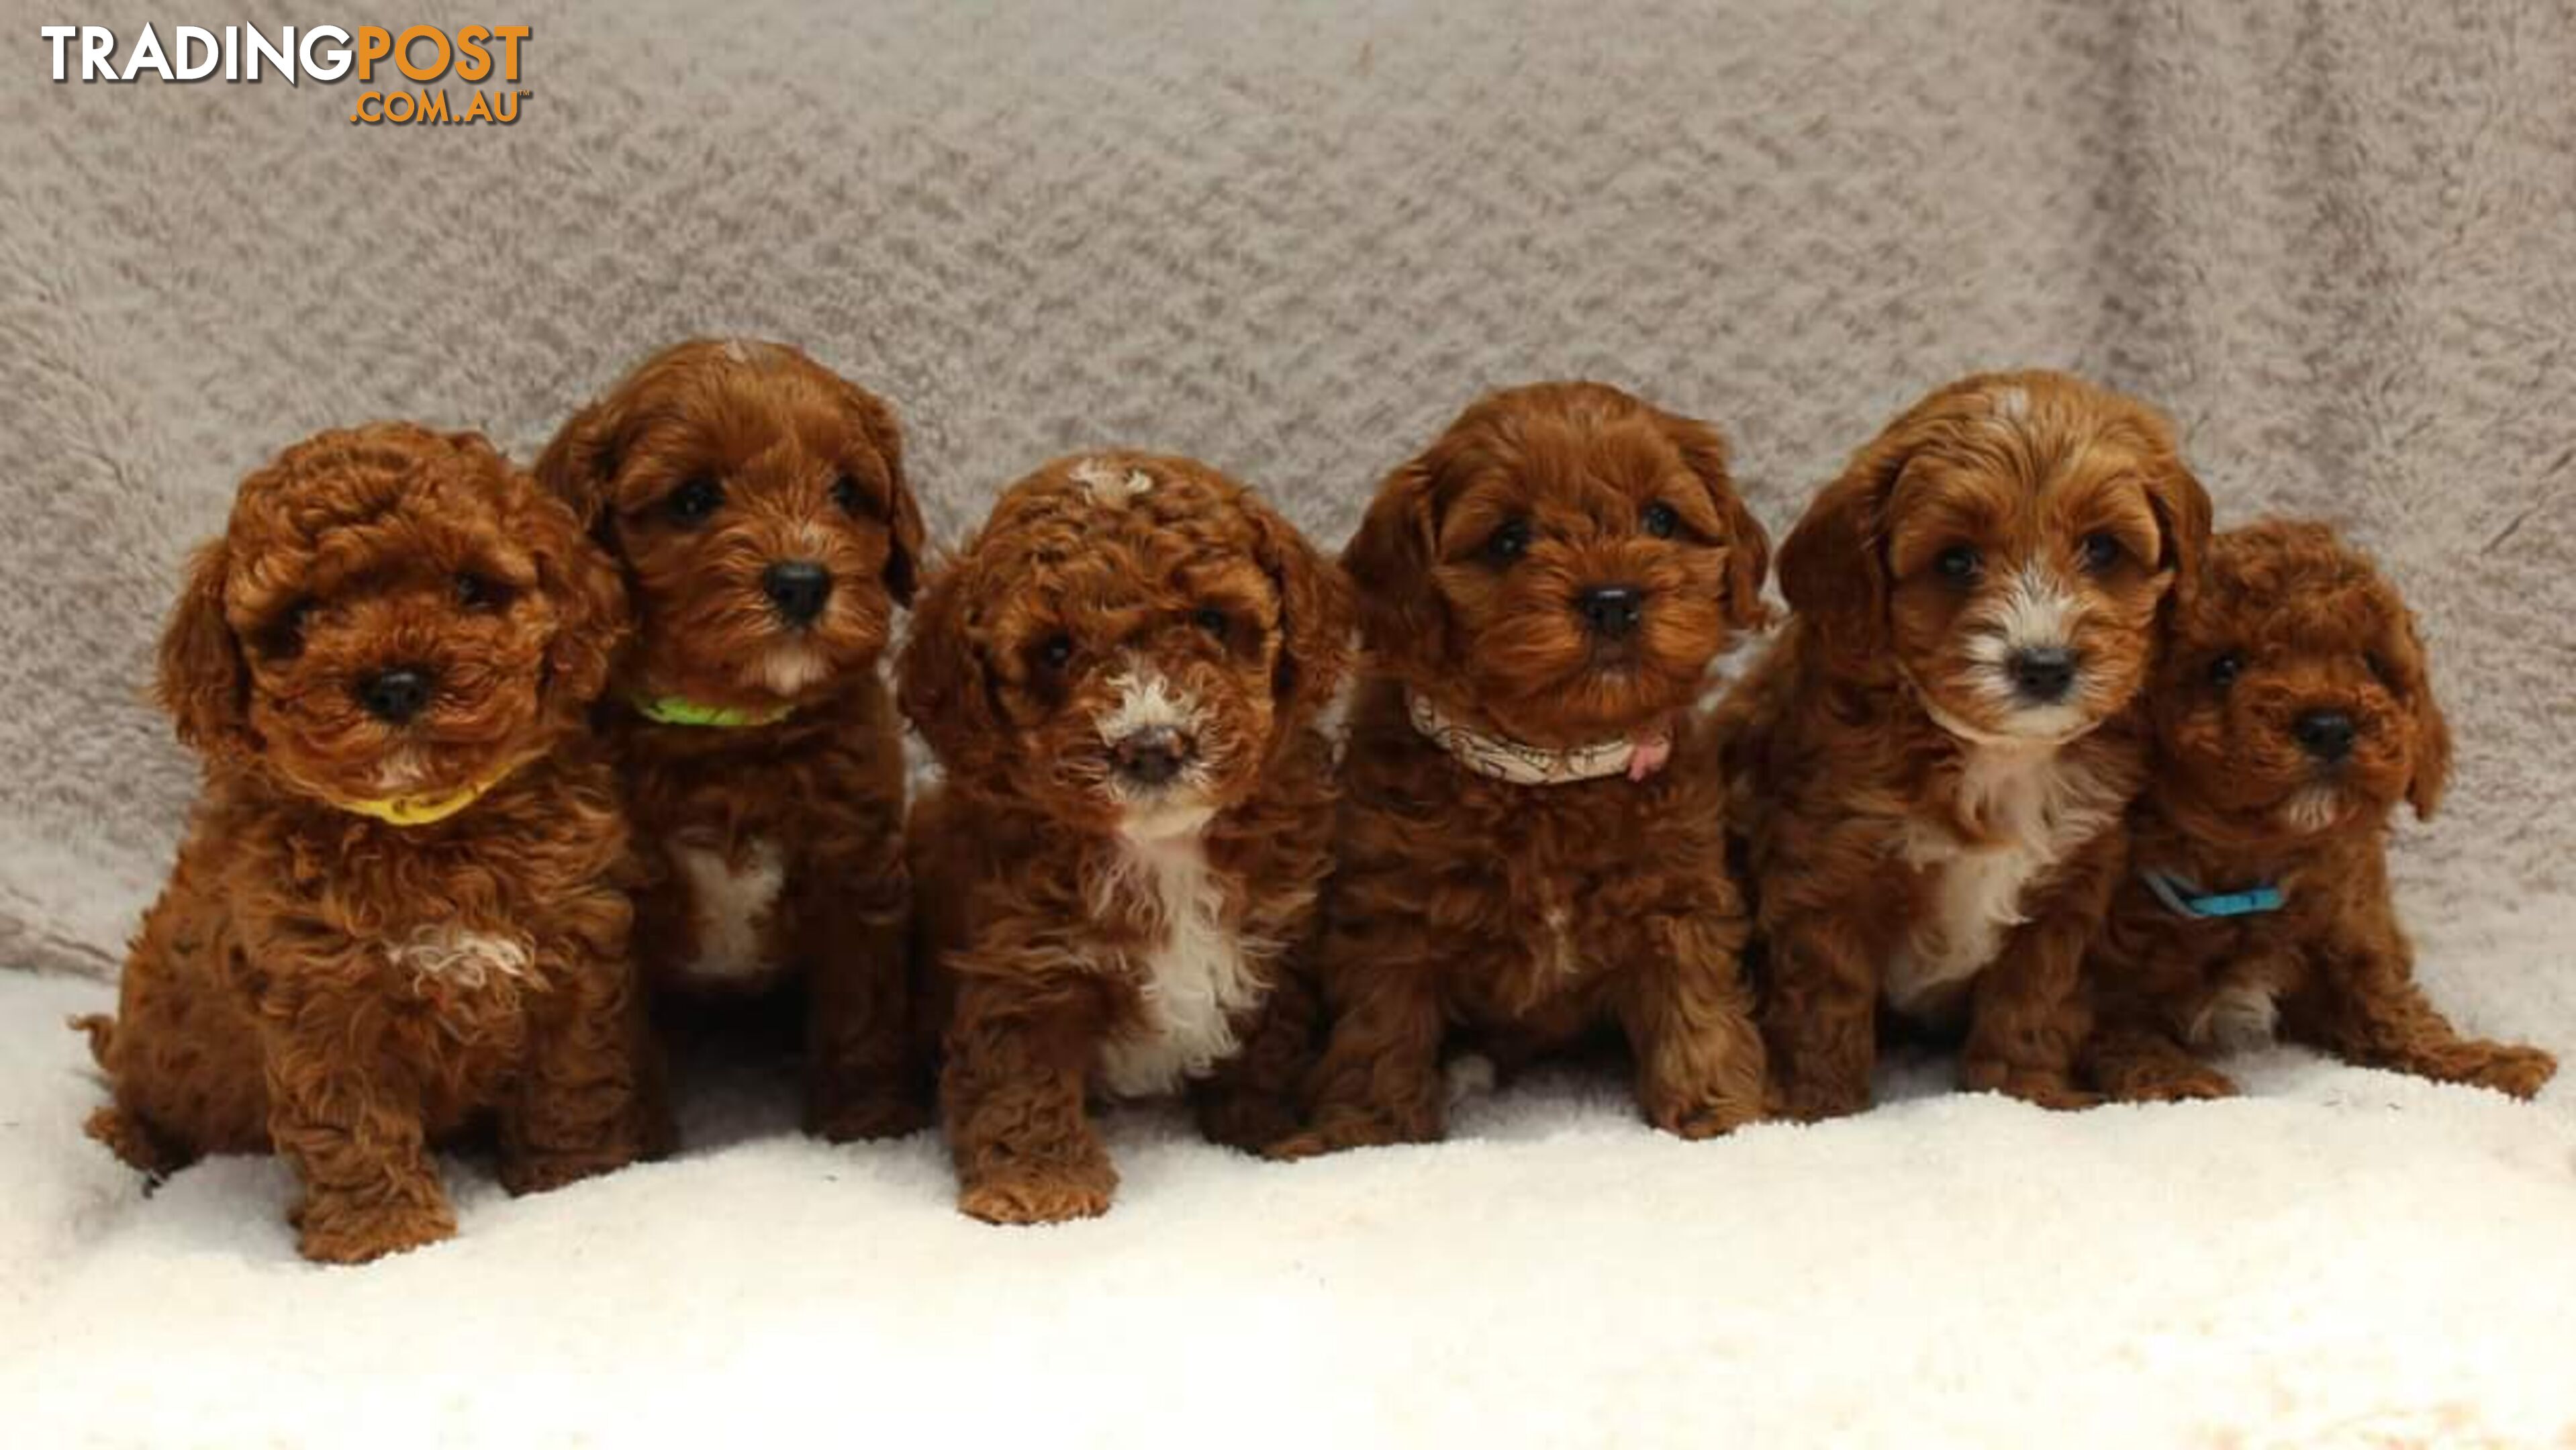 *Toy poodle stud dog - DNA CLEAR (NOT FOR SALE)